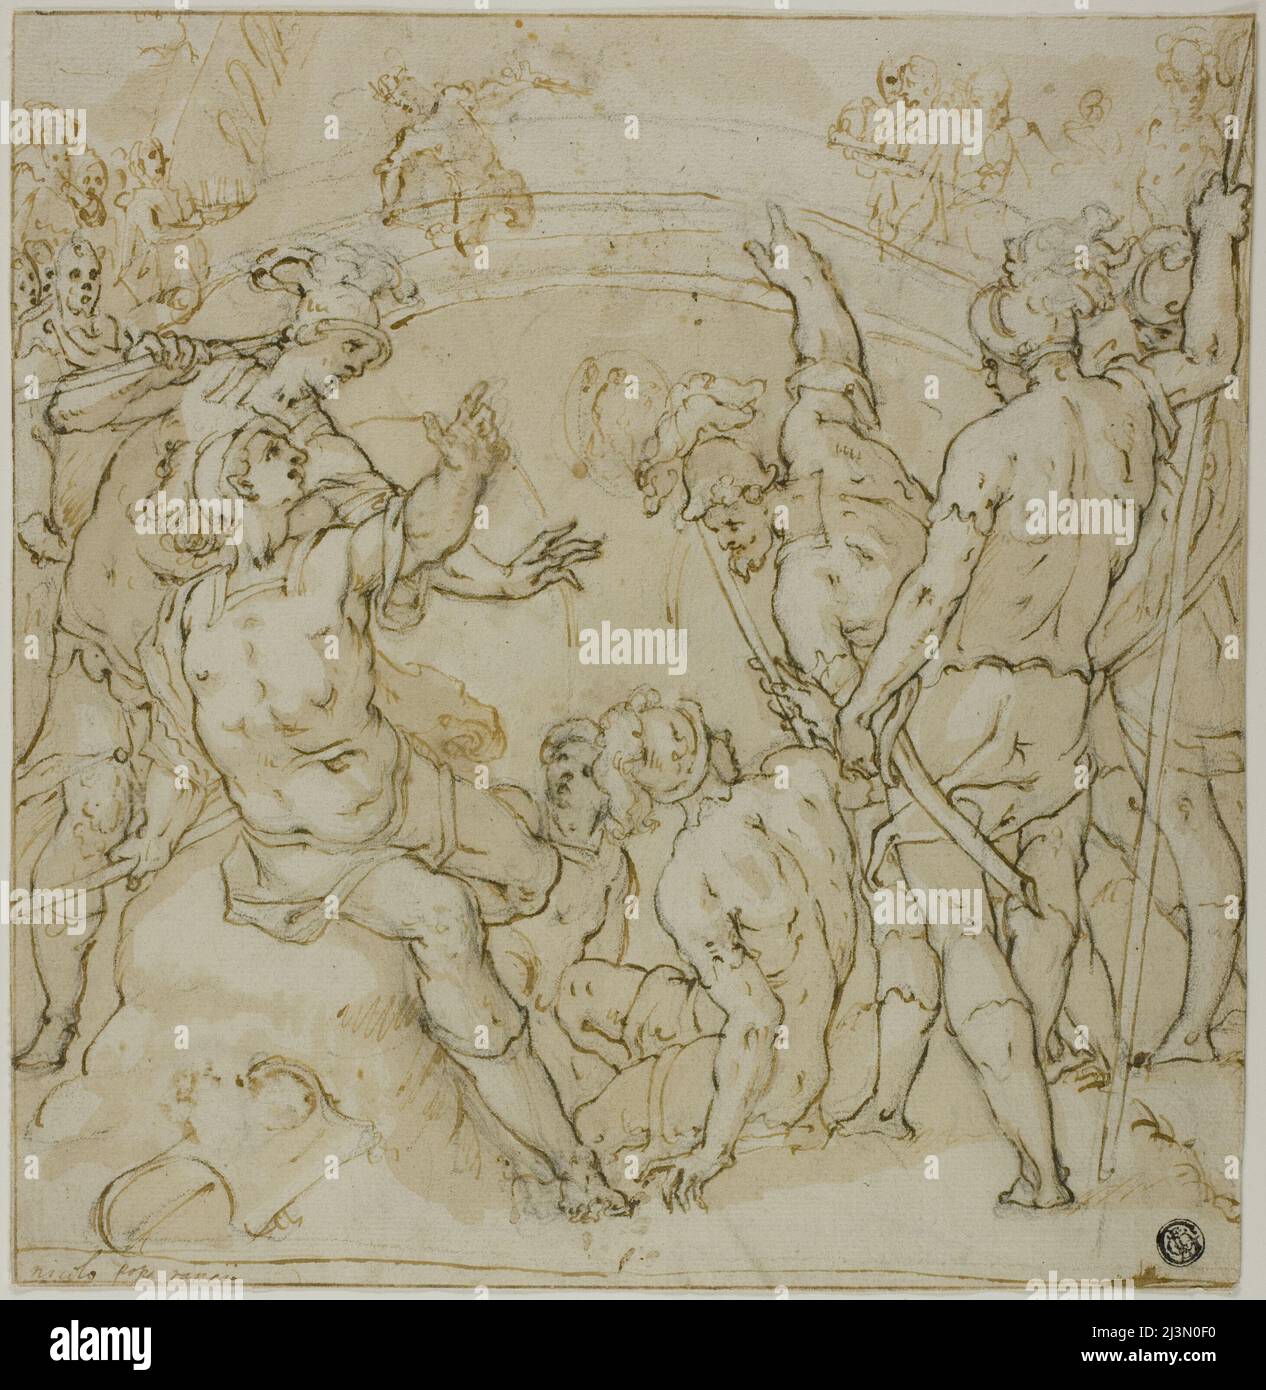 Study for the Duel between Heraclius and Khosrau (recto); Sketches of Seated Figure (verso), 1582. Stock Photo